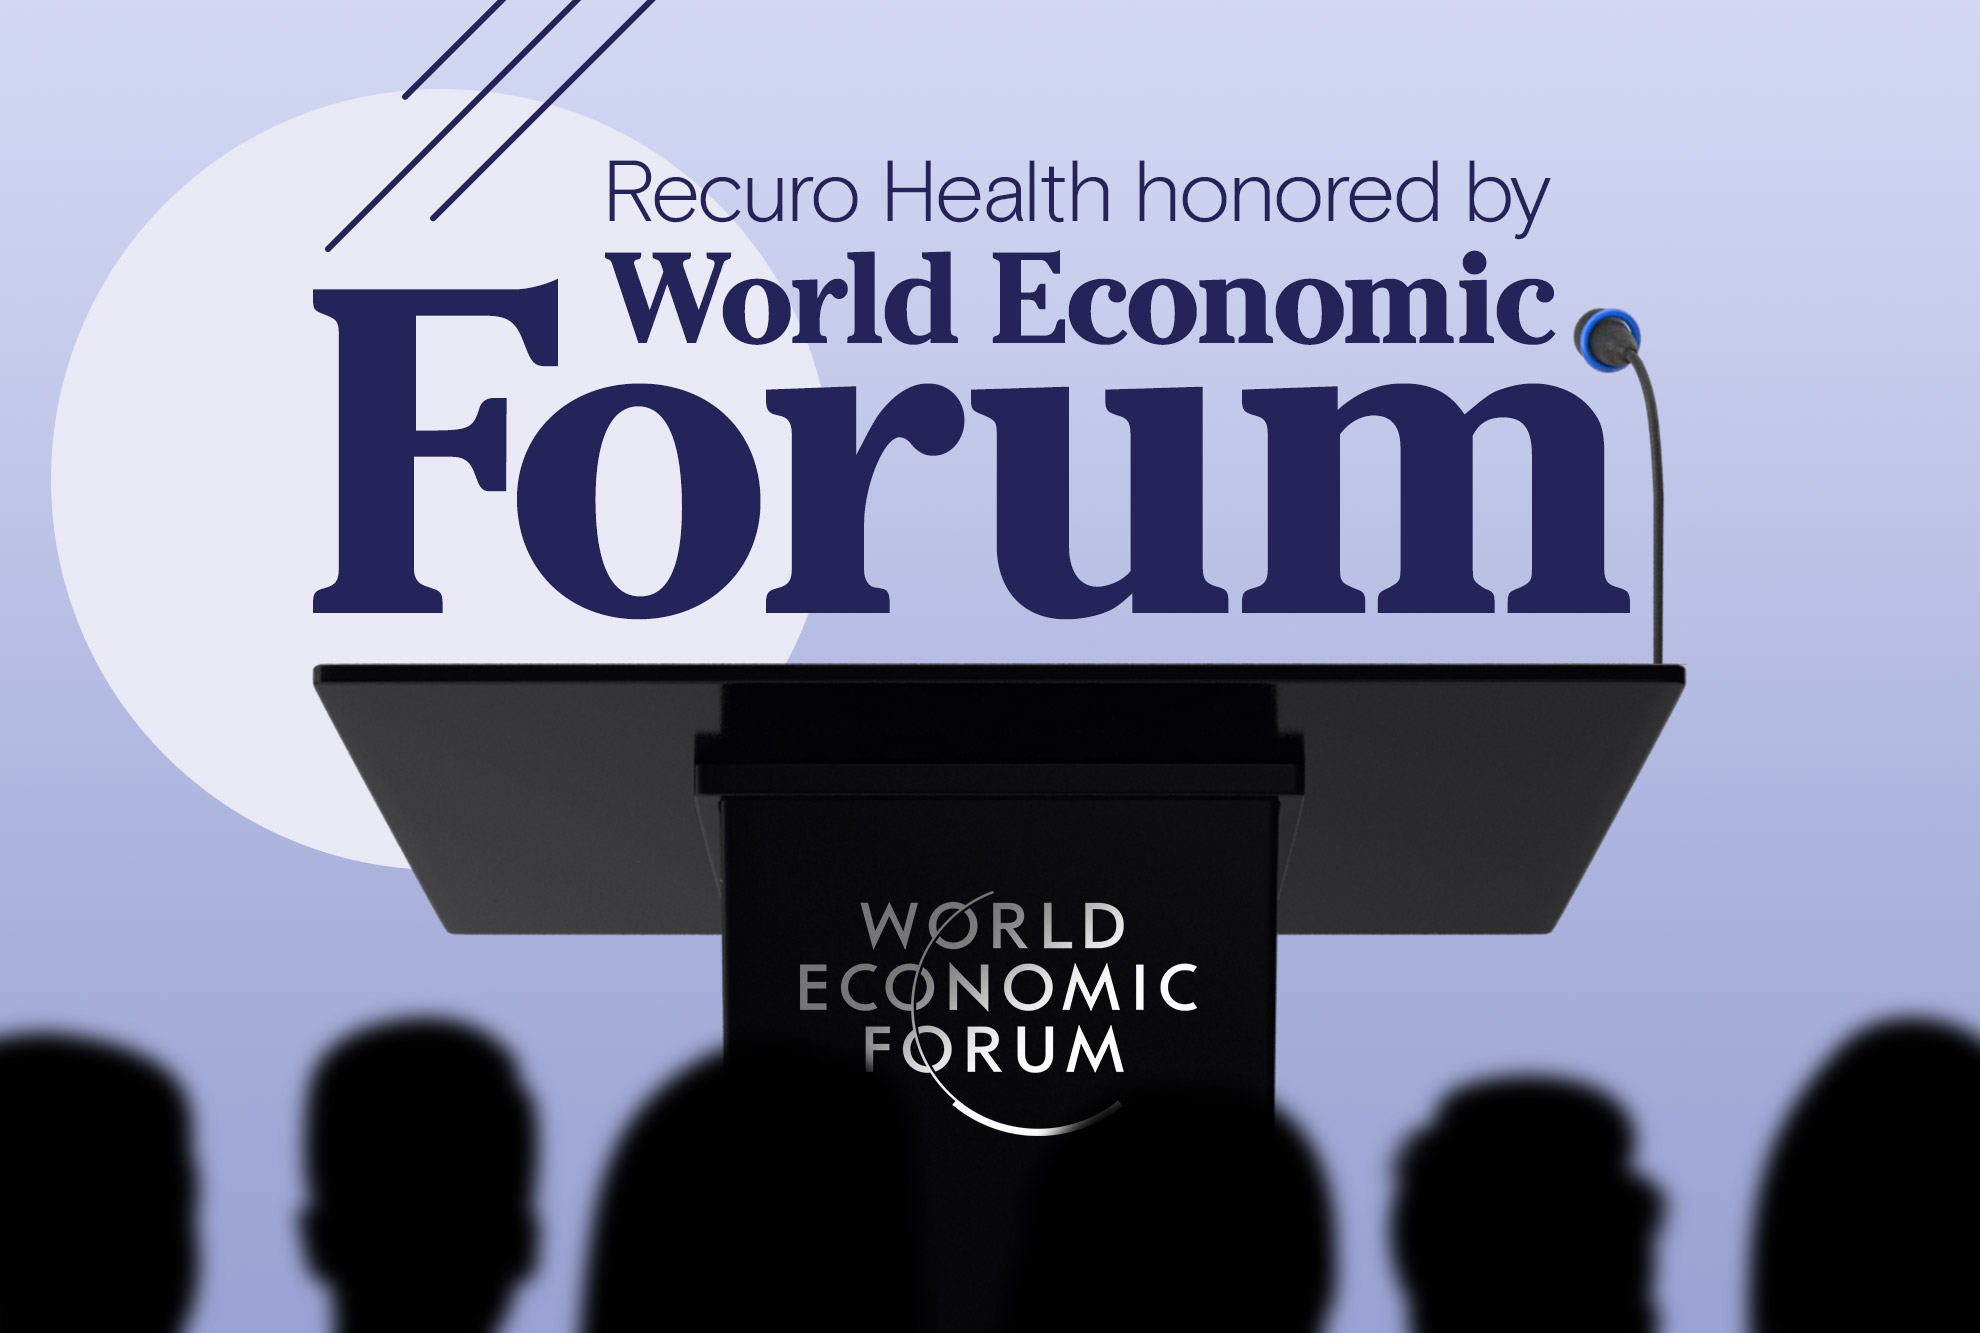 Recuro Health Awarded as Technology Pioneer by World Economic Forum 